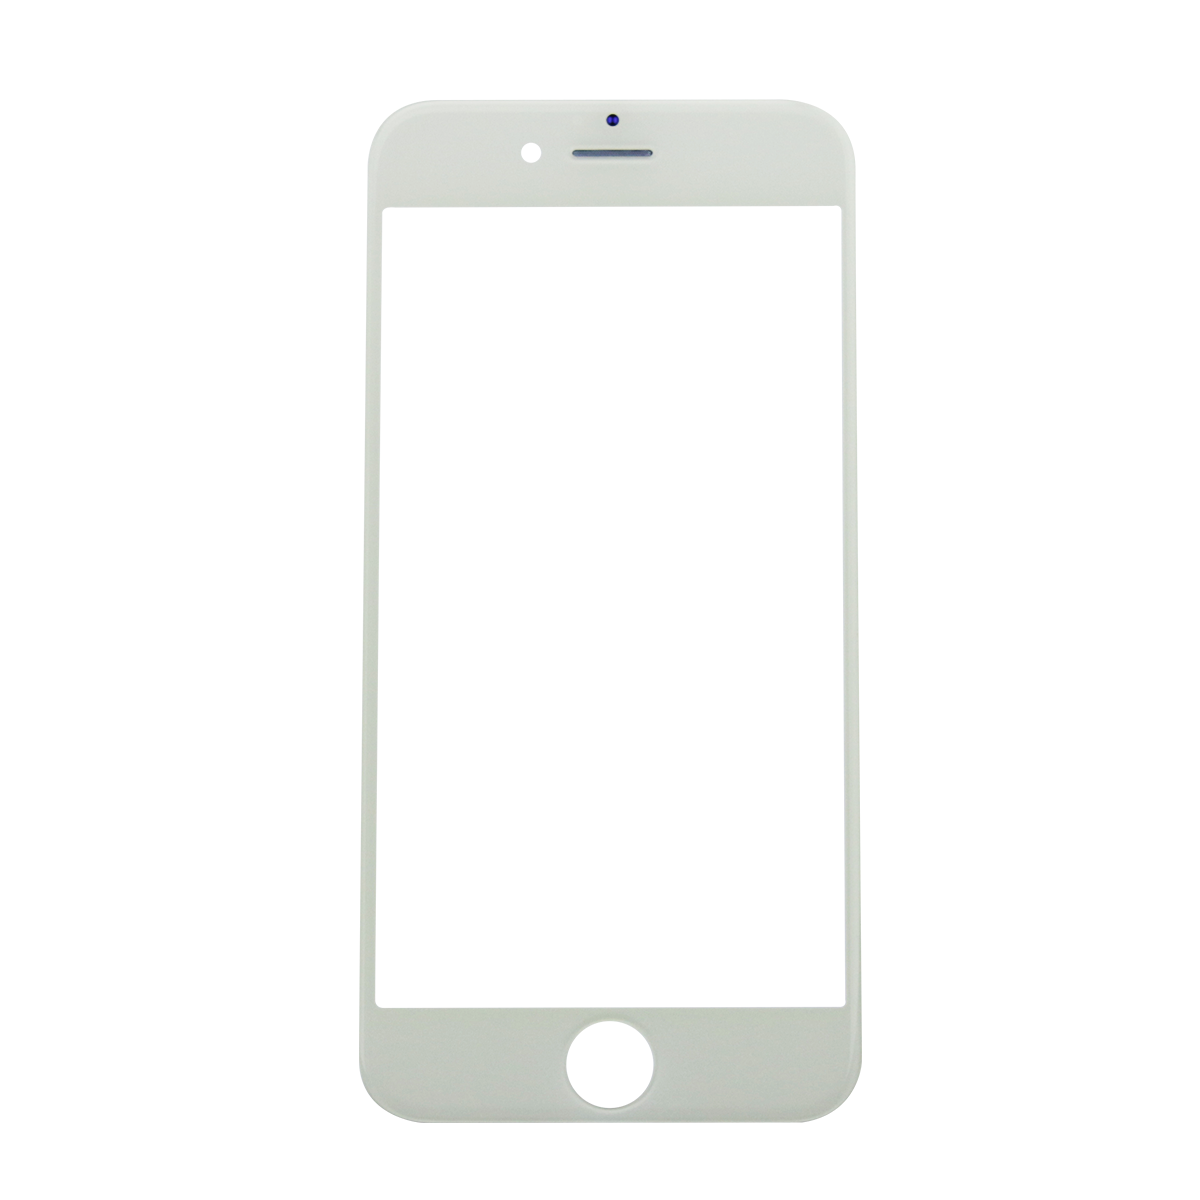 IPhone PNG Image with Transparent Background.